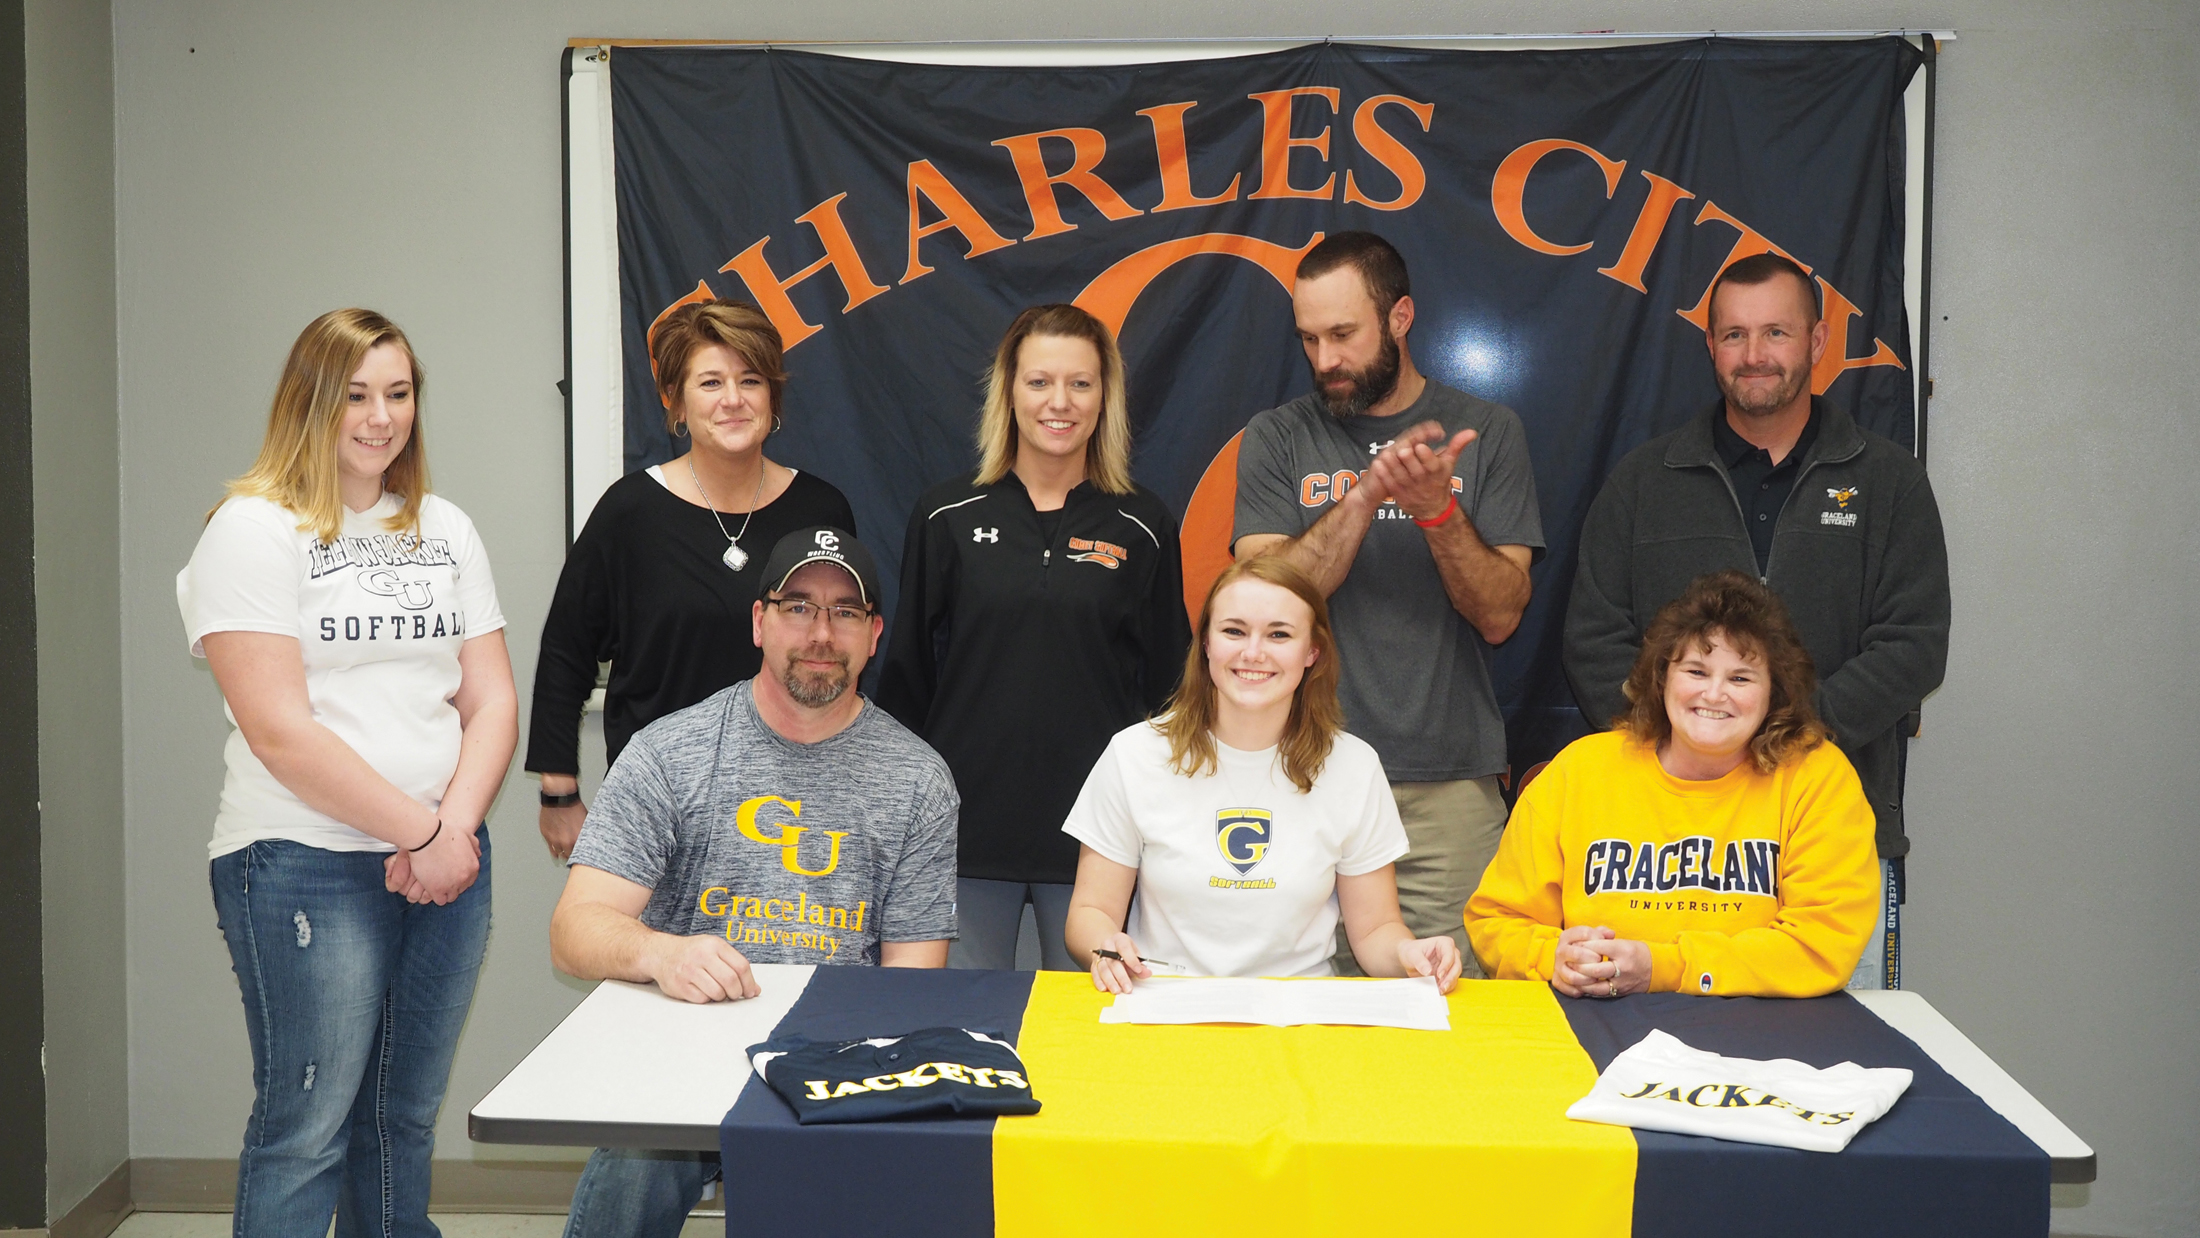 VanHauen signs to play softball for Graceland